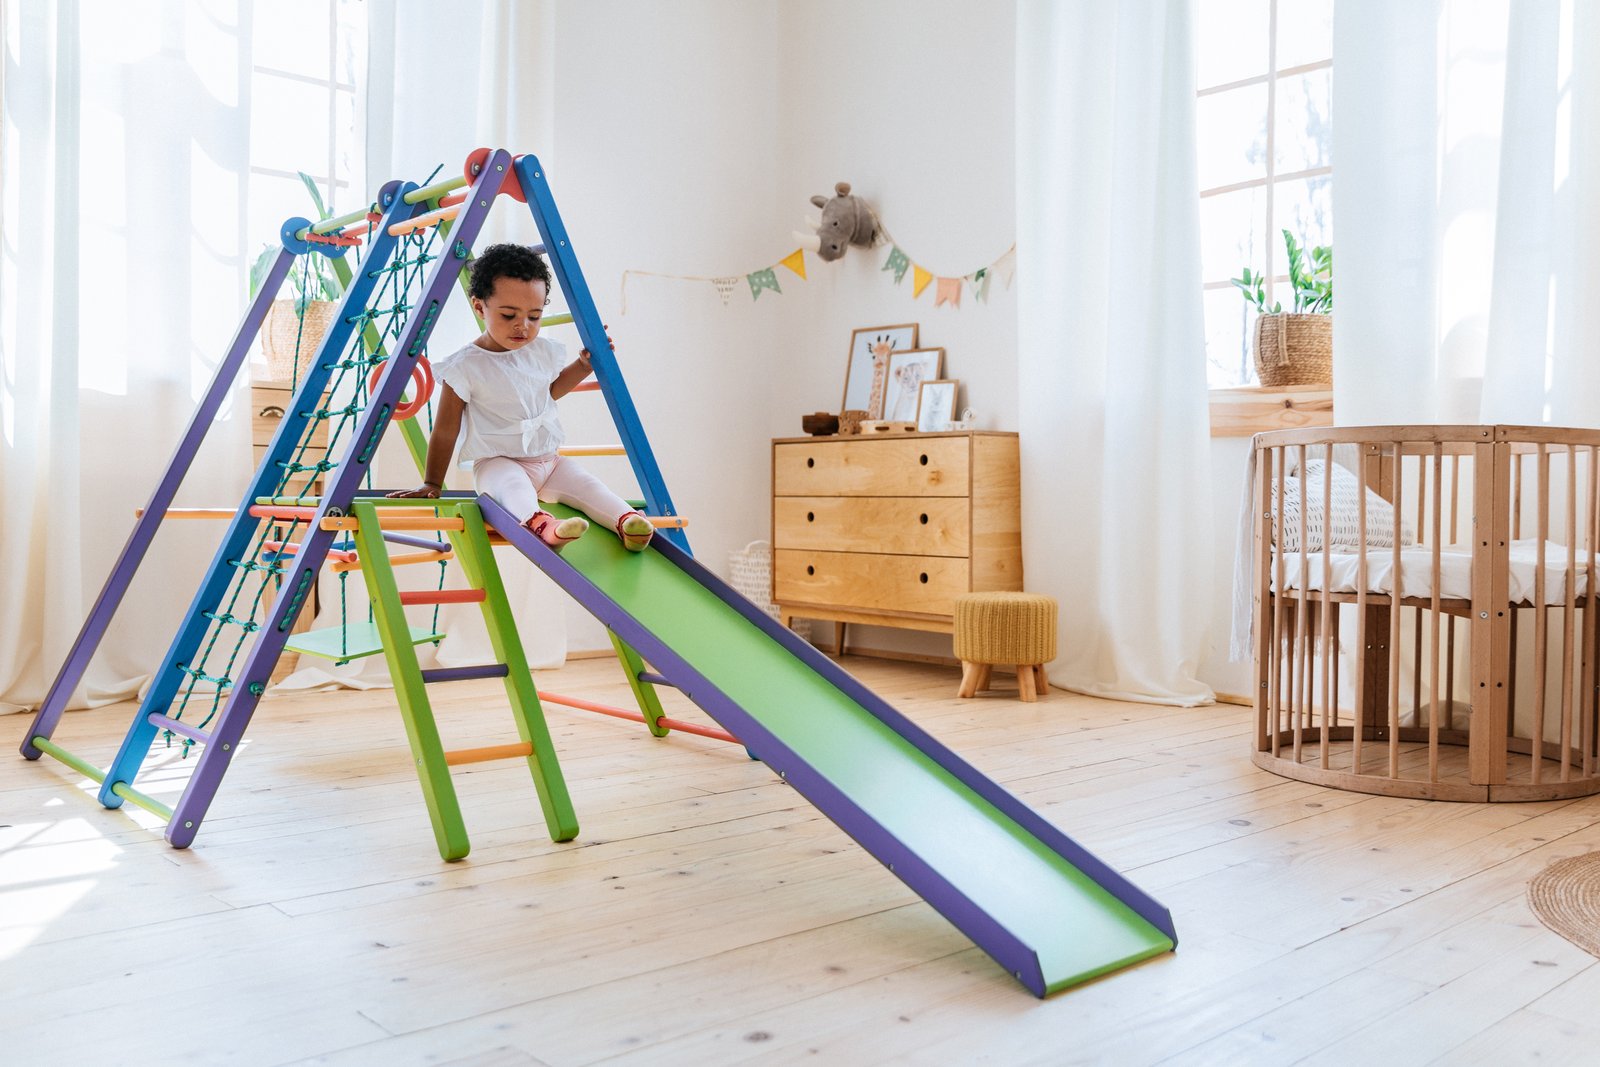 Scaling new heights: Indoor Climbing Toys for Toddlers